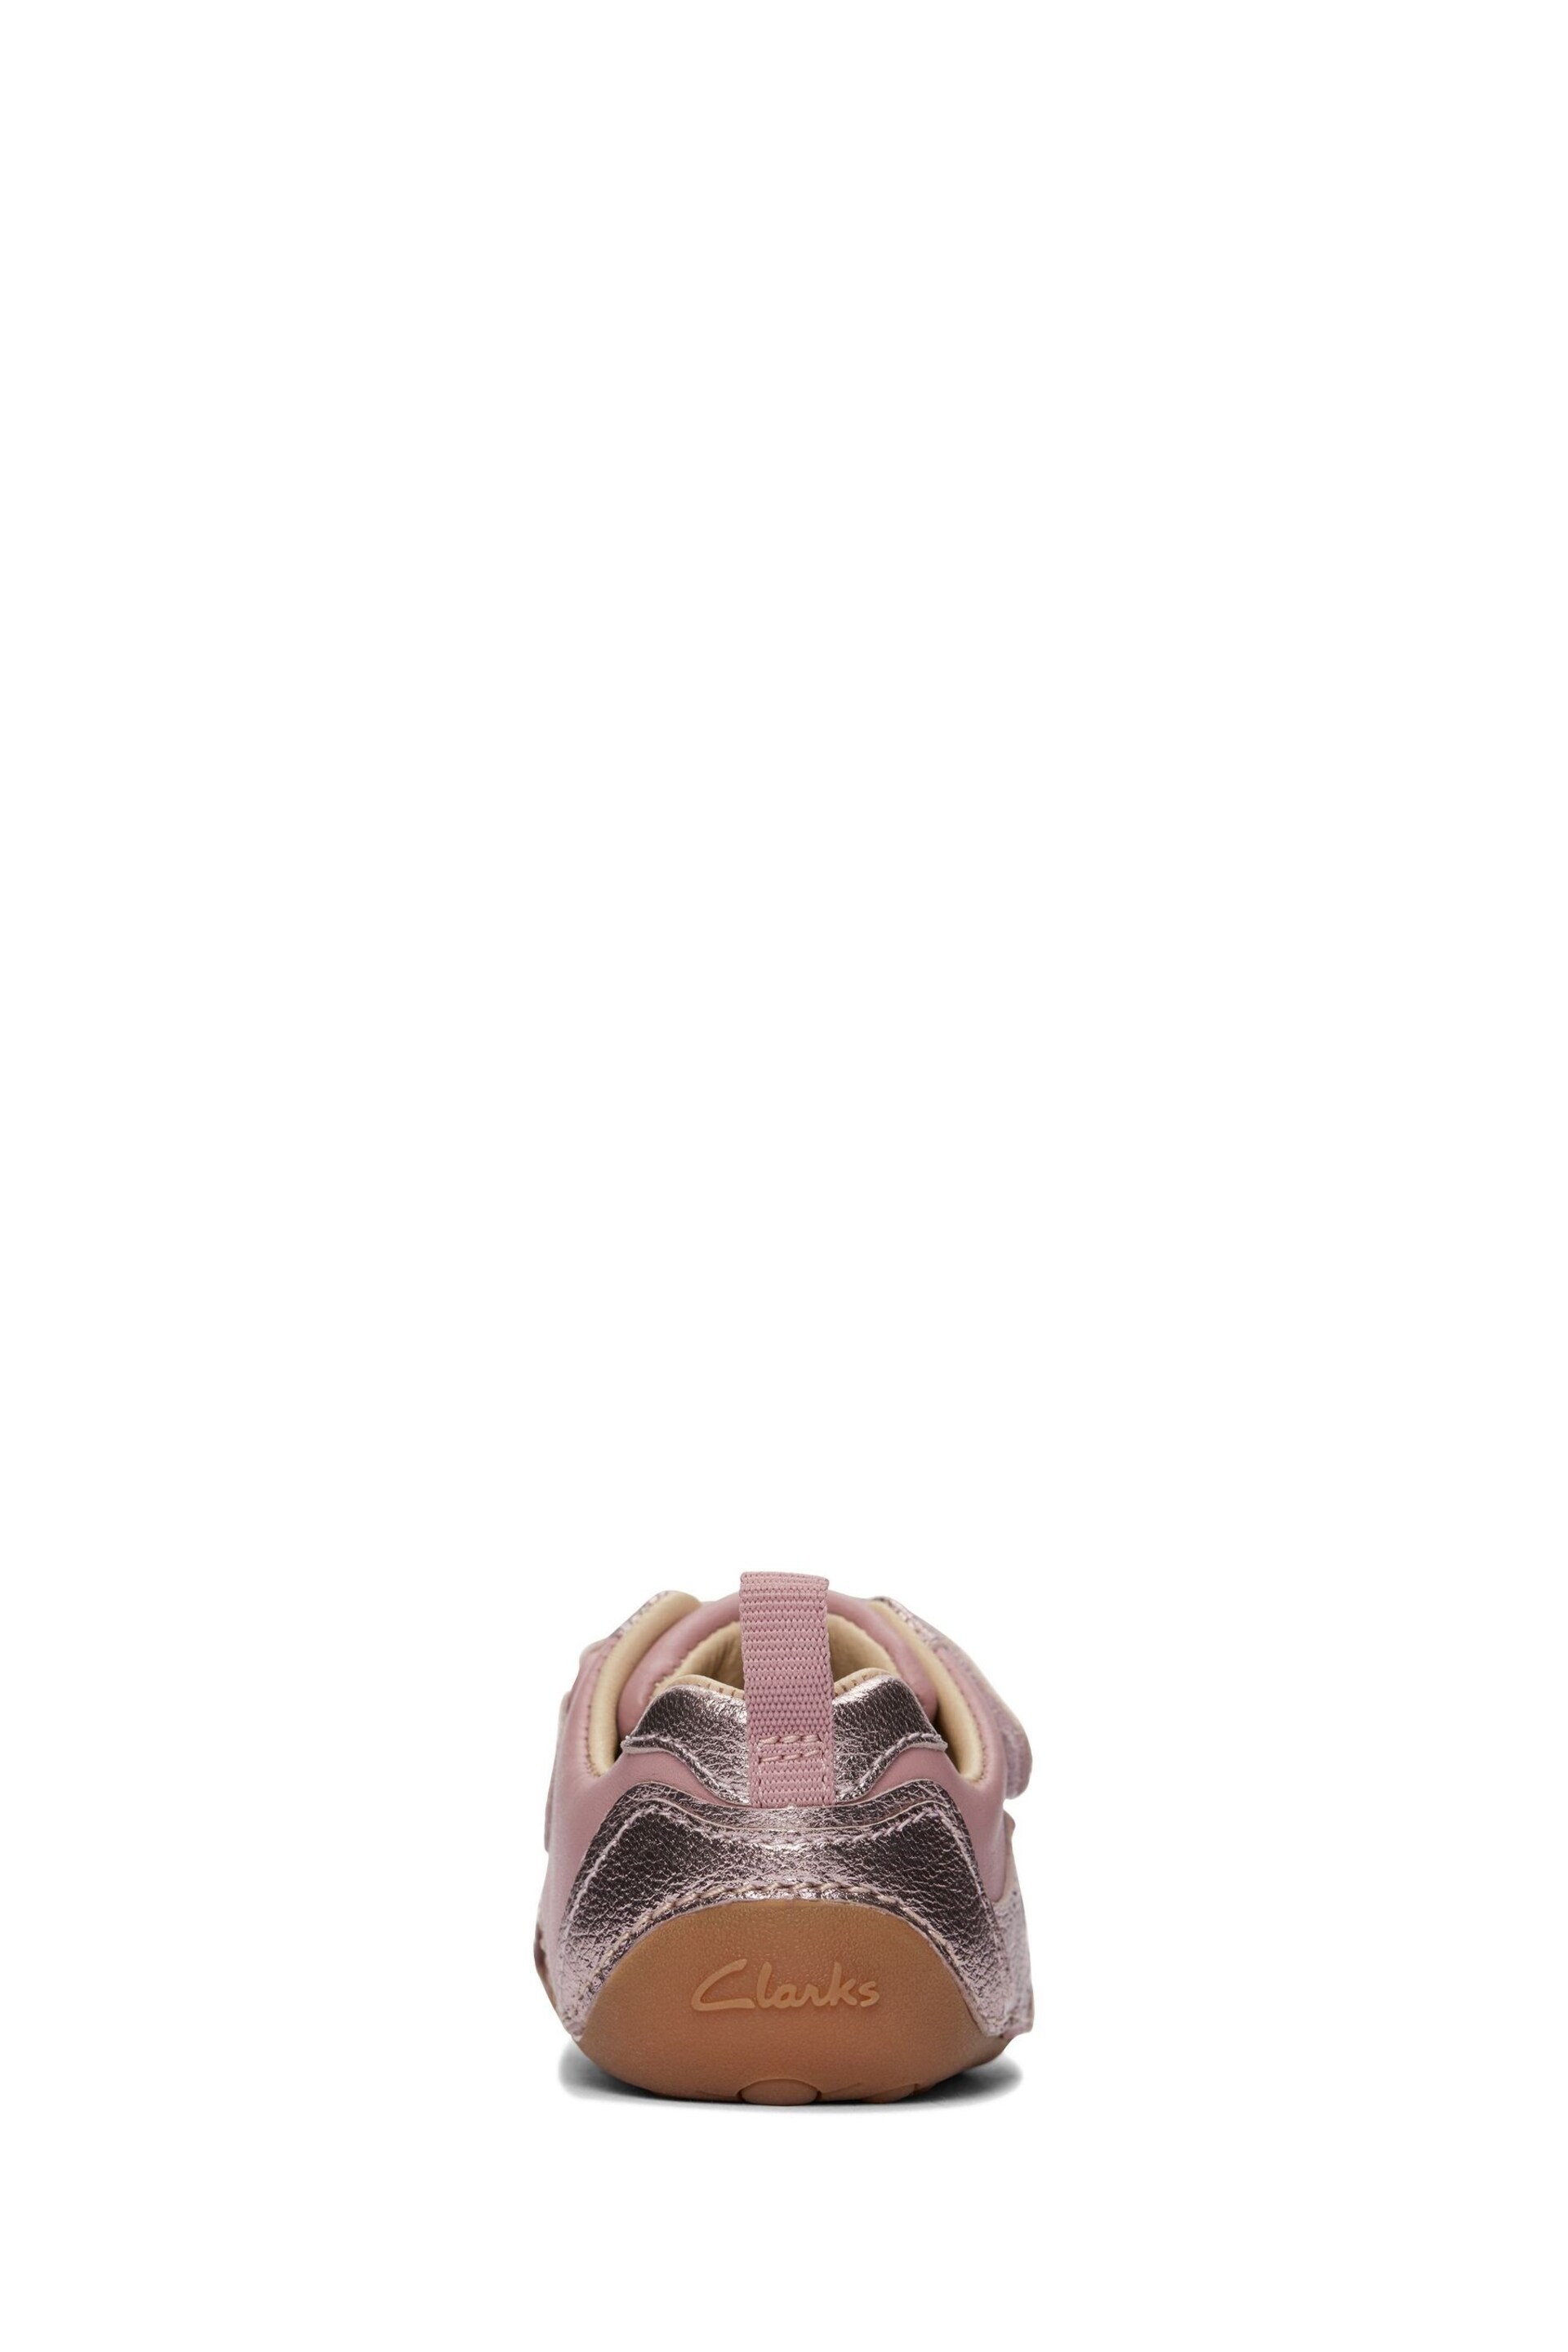 Clarks Pink Dusty Leather Tiny Sky Toddler Shoes - Image 5 of 7